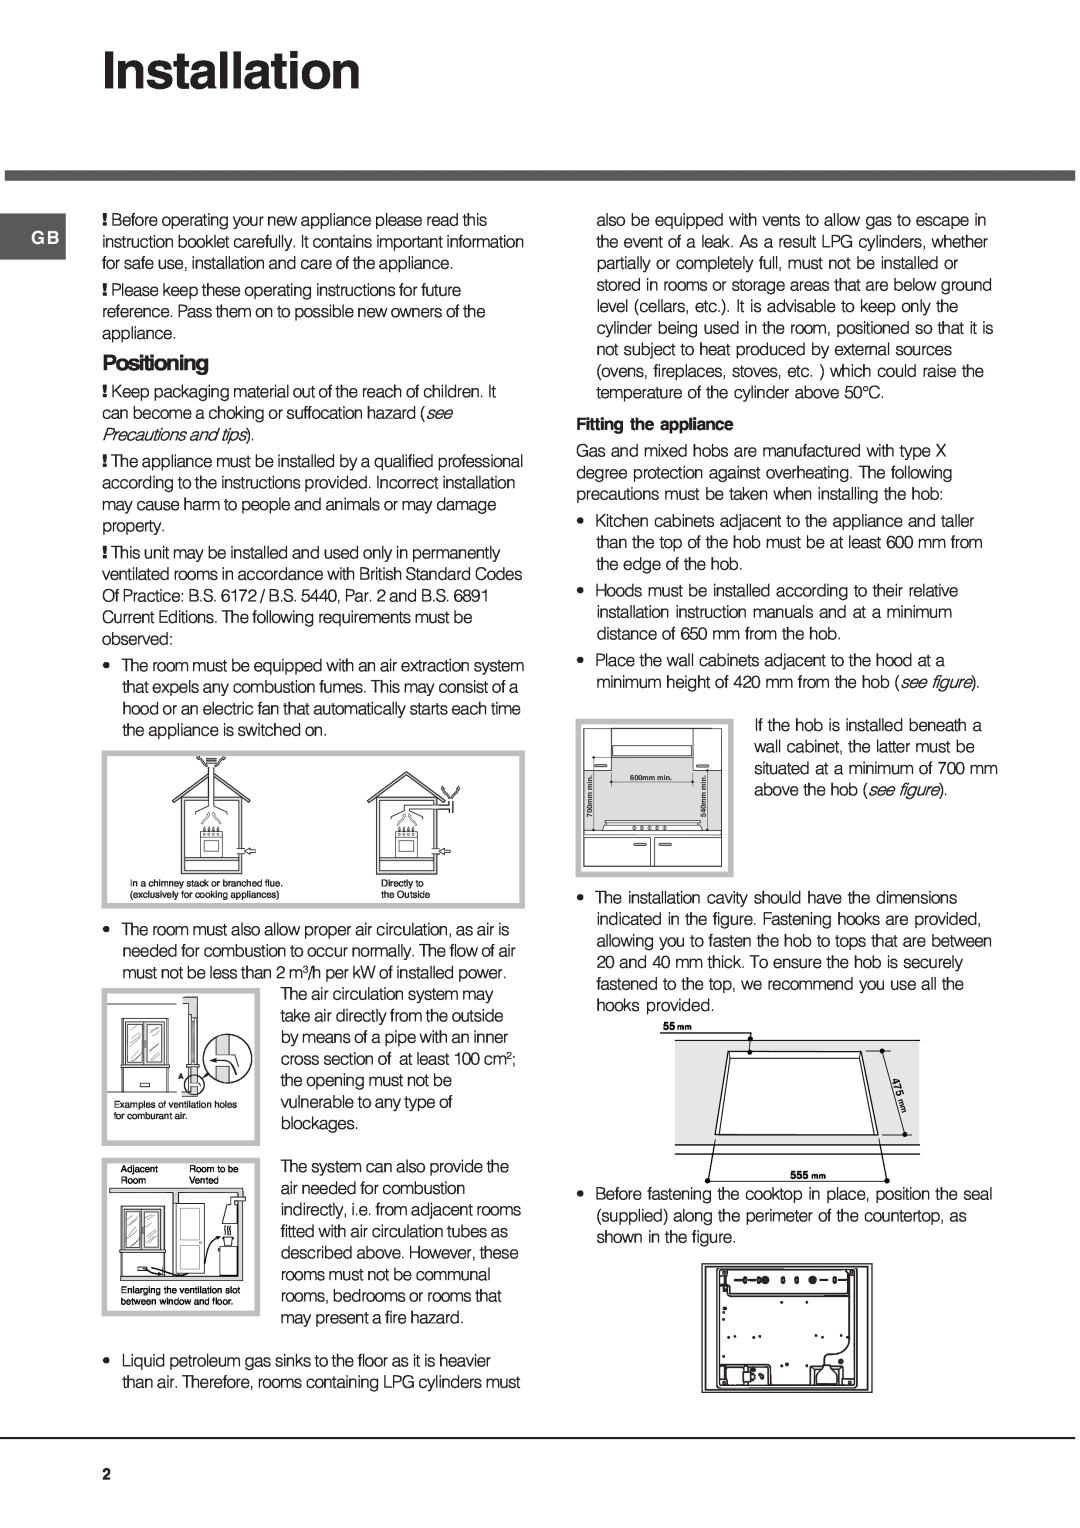 Hotpoint GQ641TSI, GQ751TSI, GE75DX specifications Installation, Positioning 